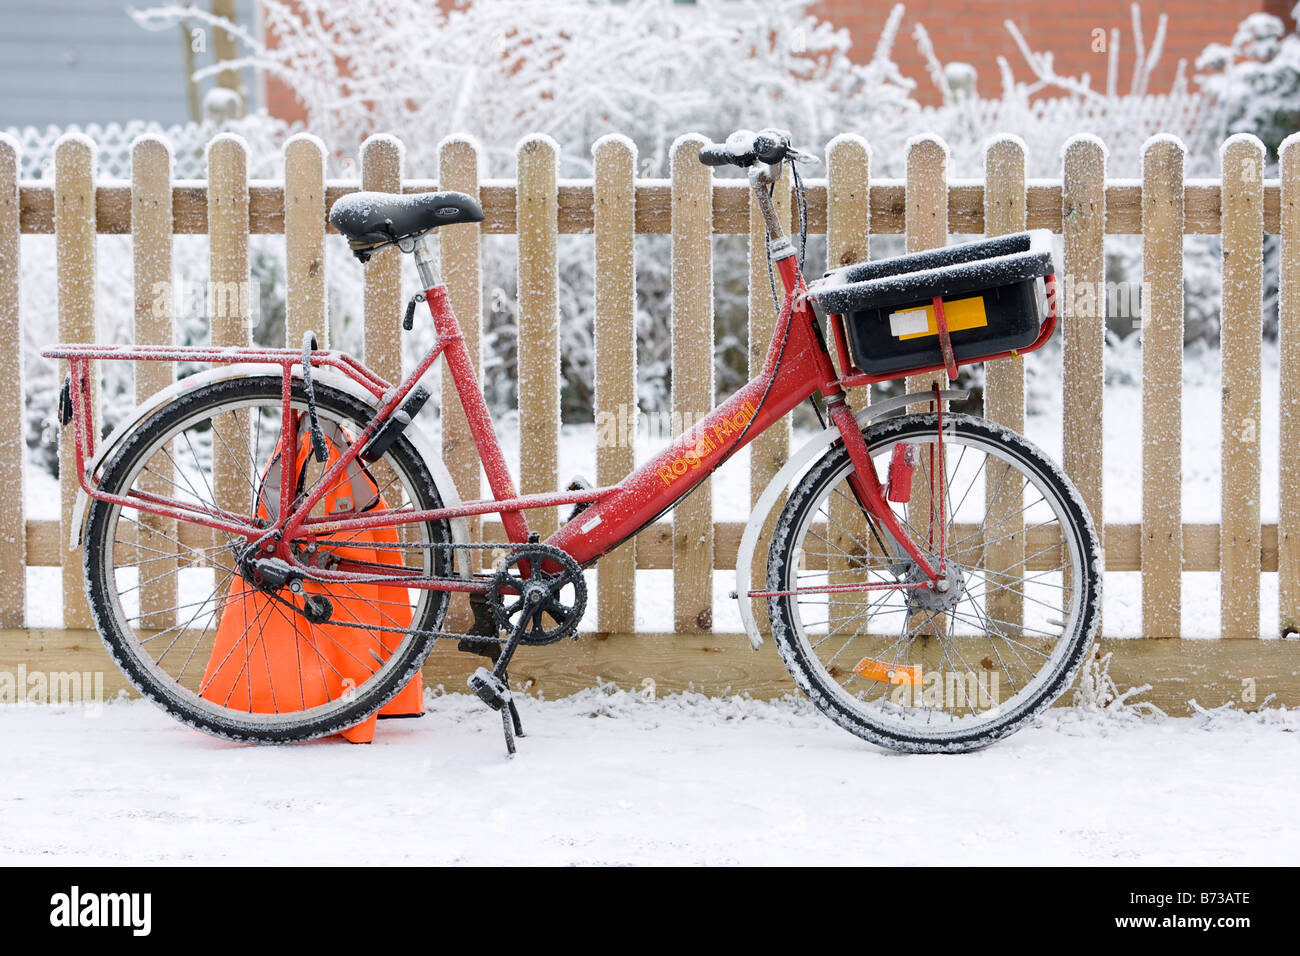 A british royal mail postal delivery bicycle leaning up against a fence on a snowy winters morning. Stock Photo